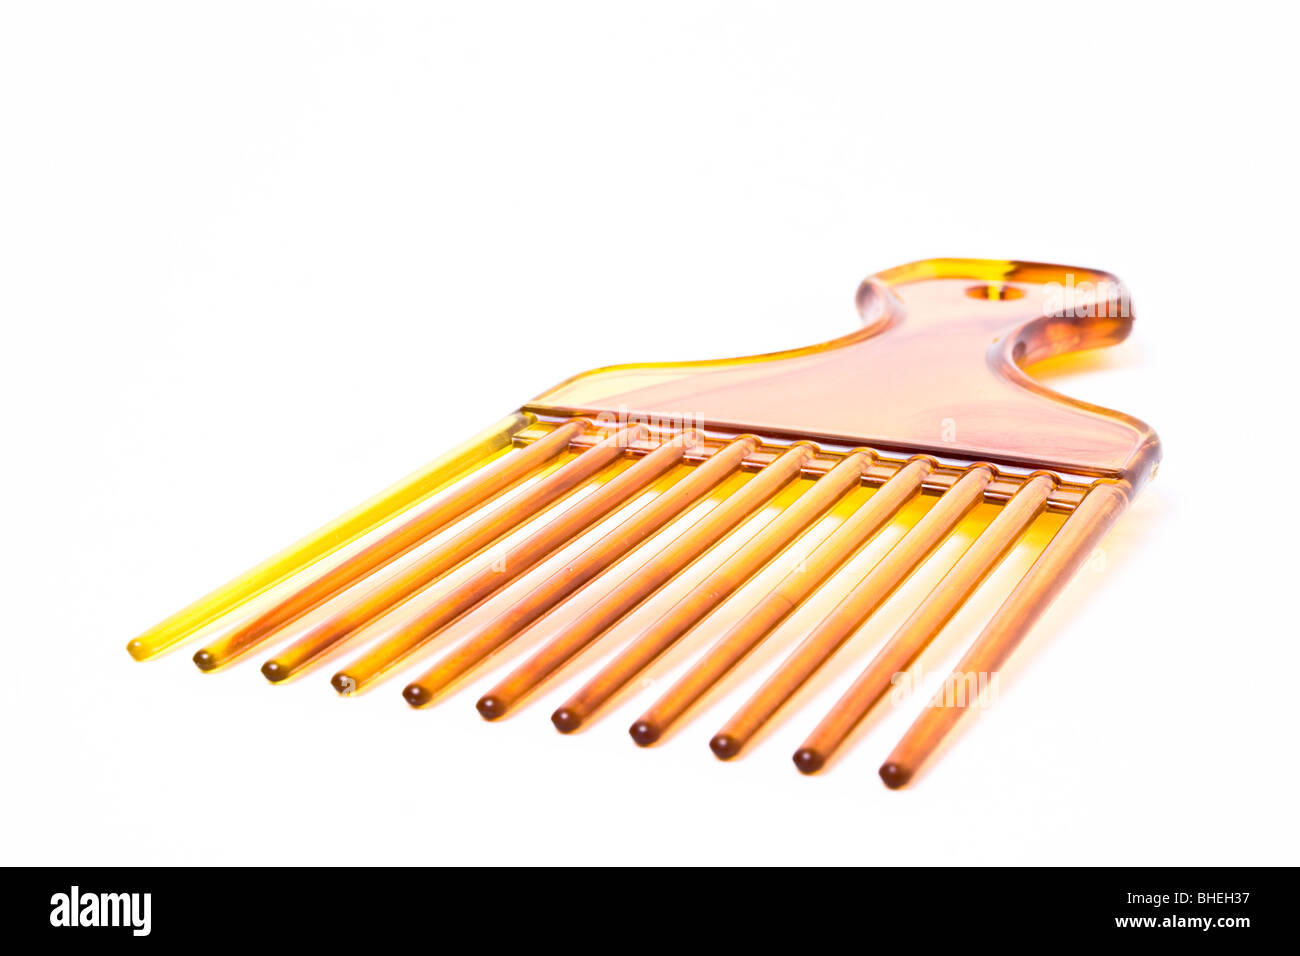 Wide plastic afro comb from low viewpoint isolated against white background. Stock Photo